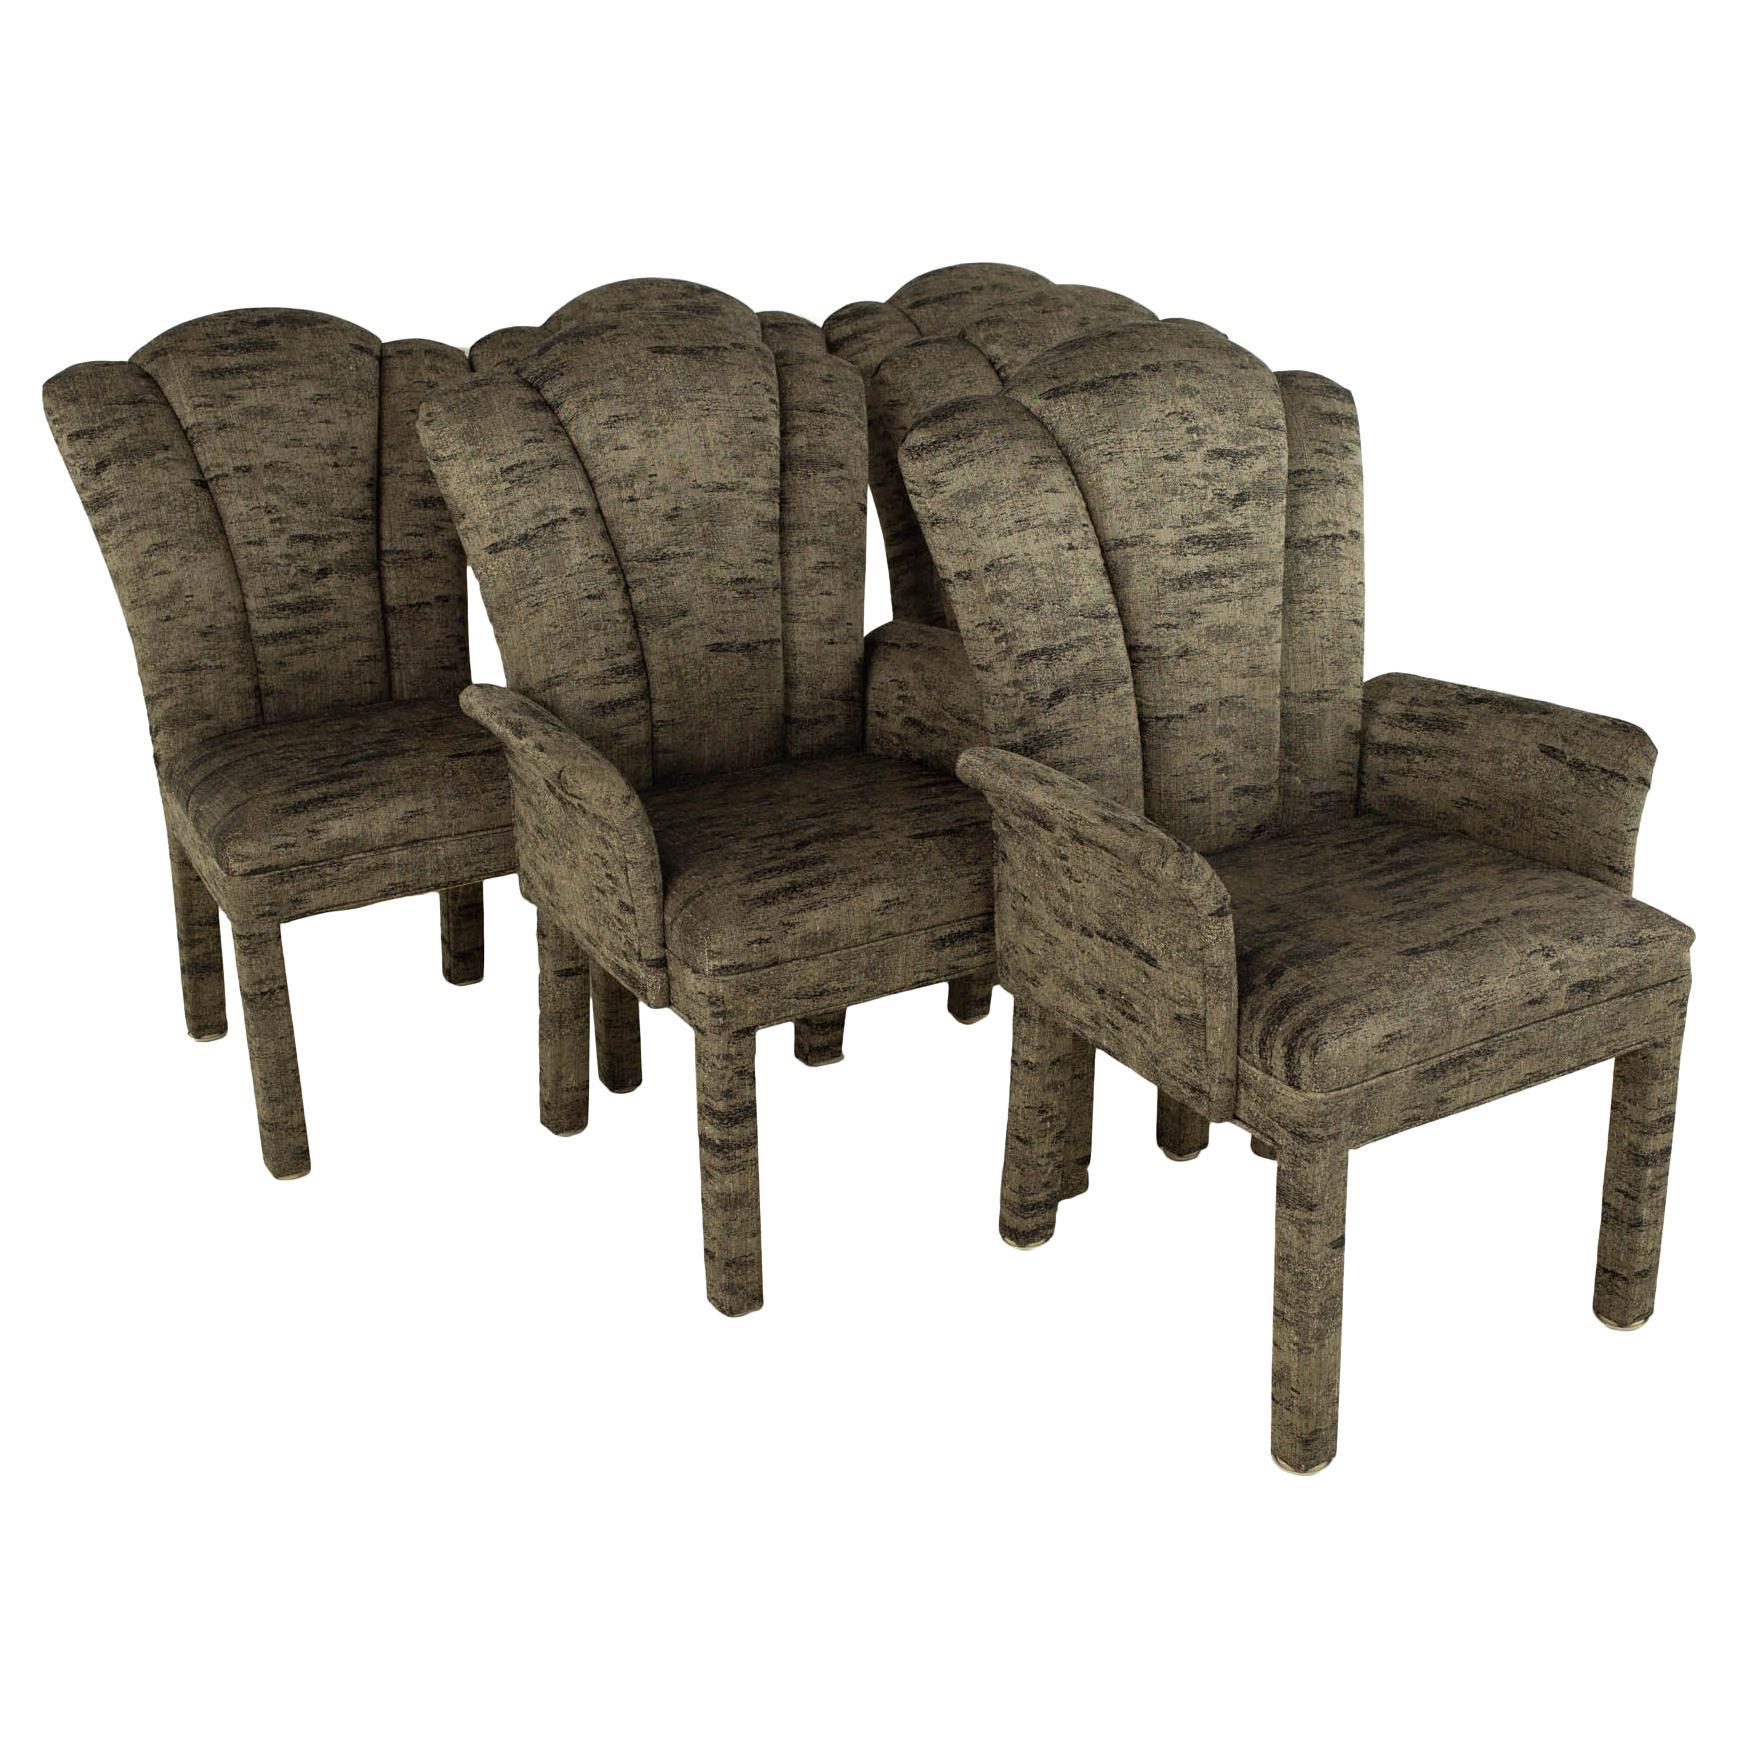 Post Modern Fully Upholstered Dining Chairs, Set of 6